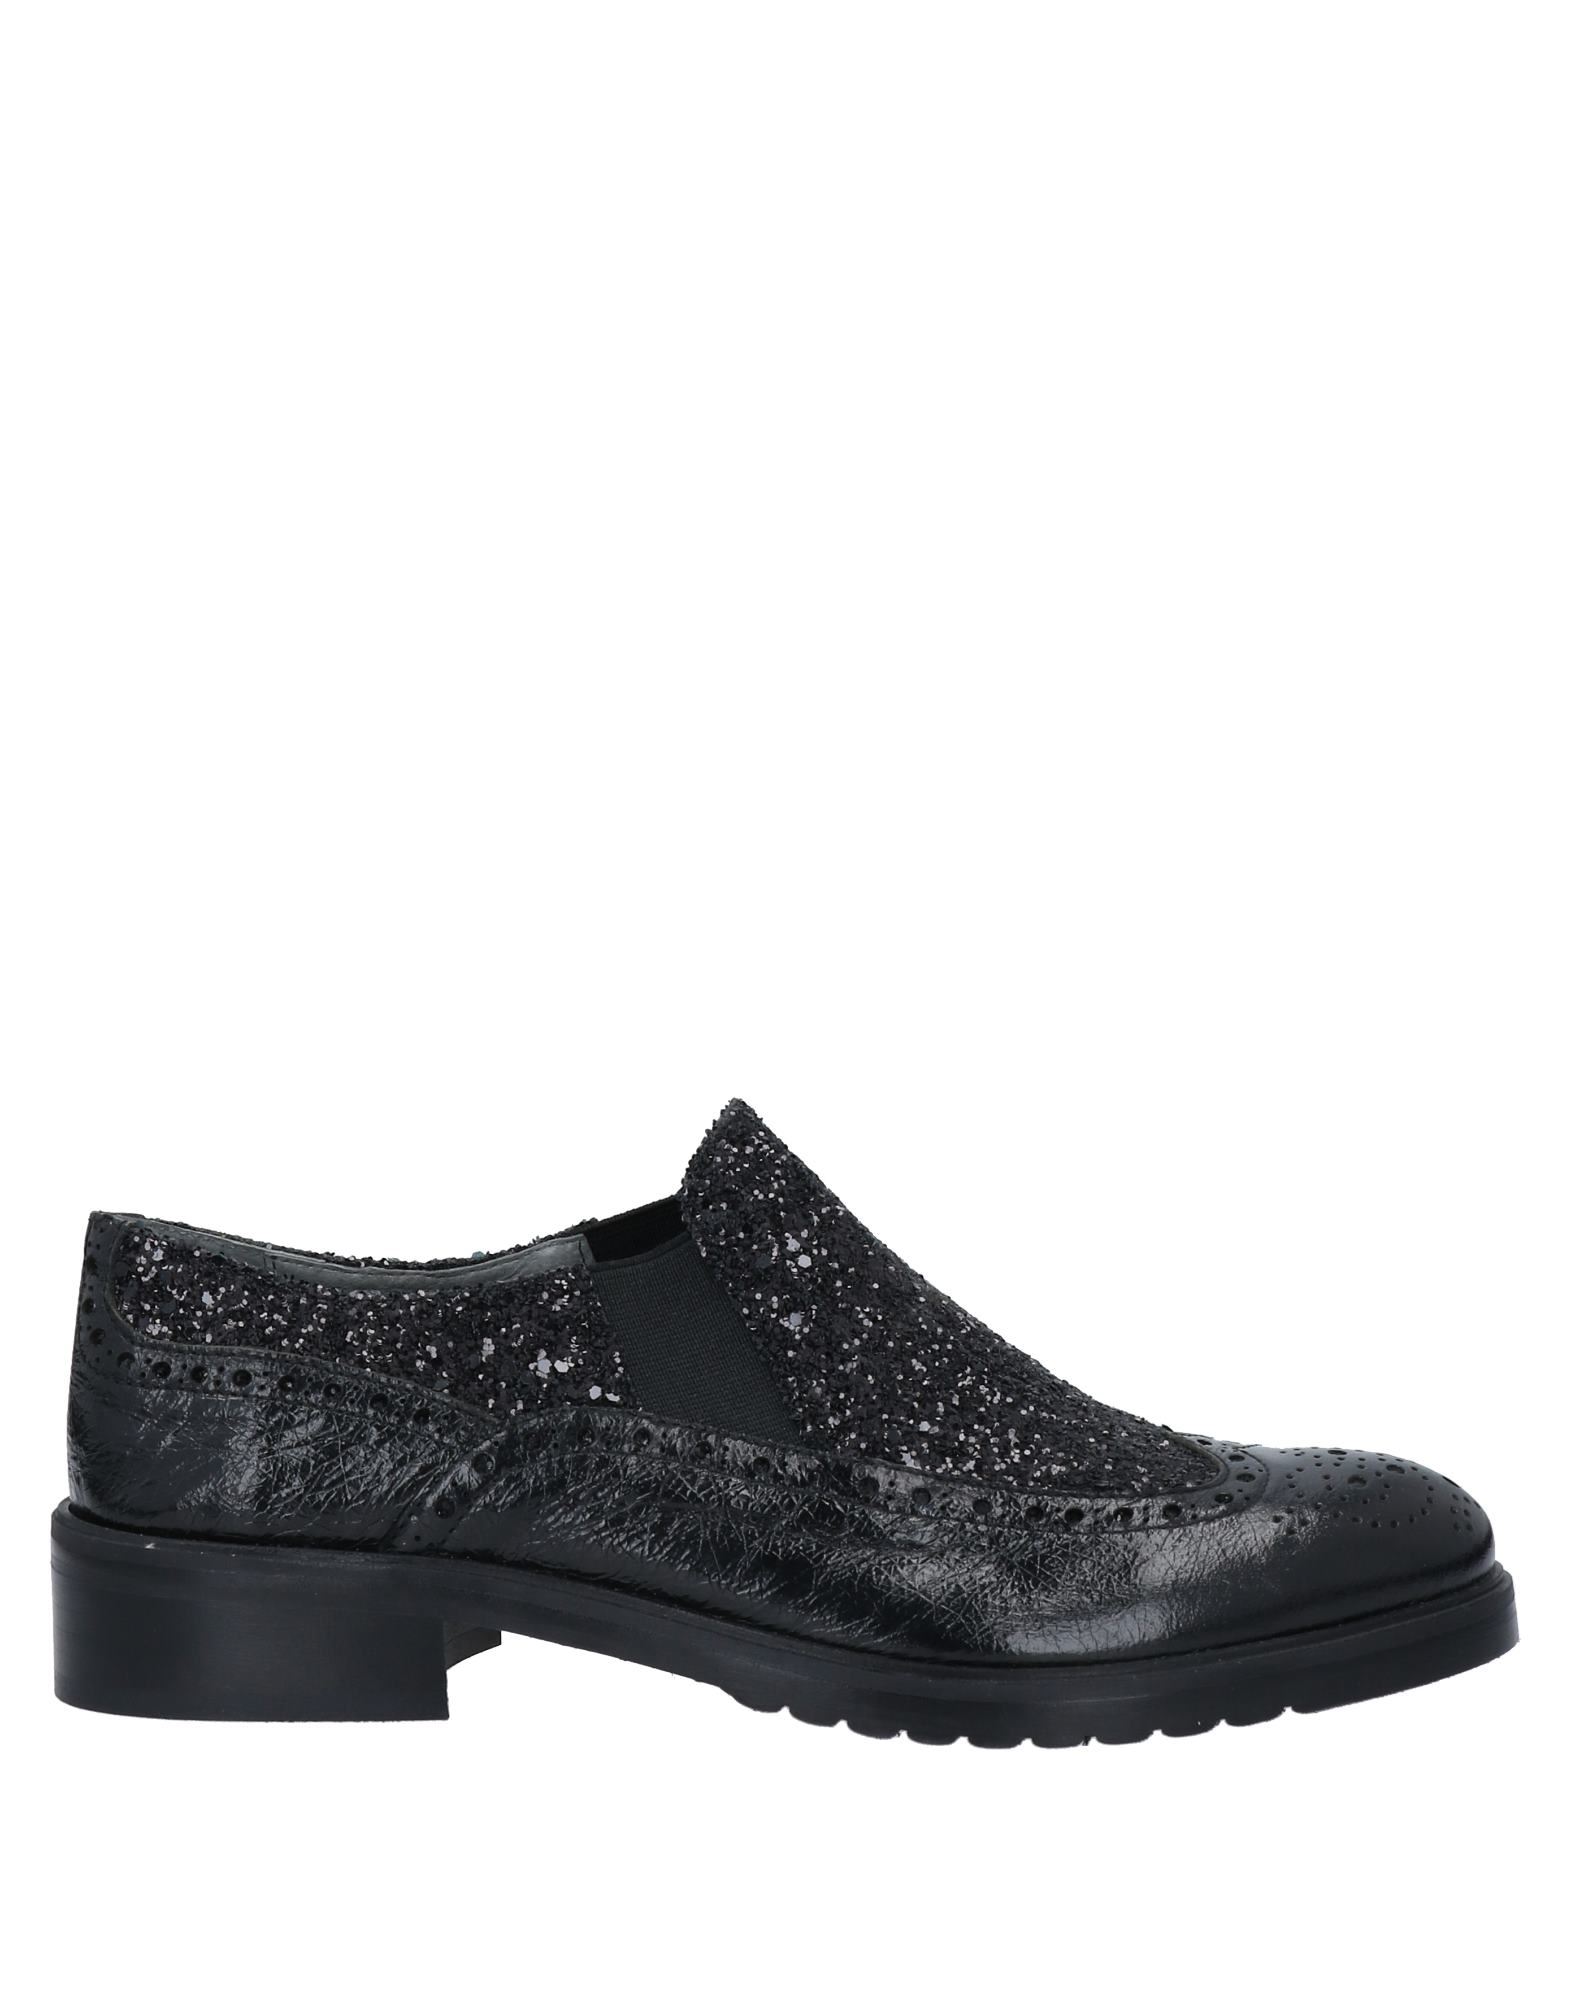 BOUTON BLACK Loafers